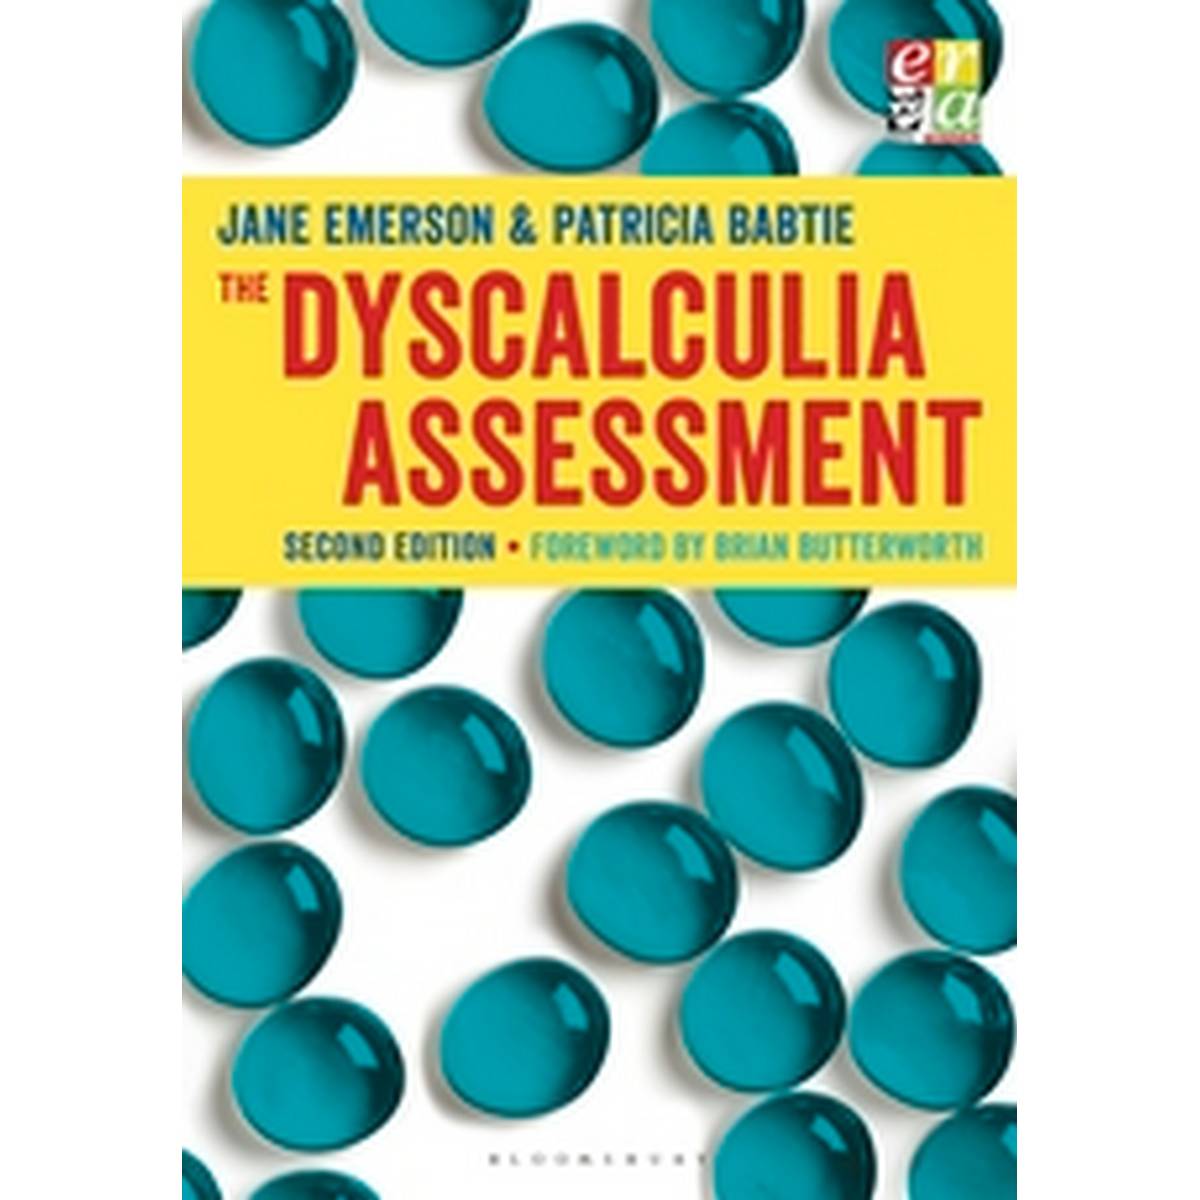 The Dyscalculia Assessment 2nd Edition